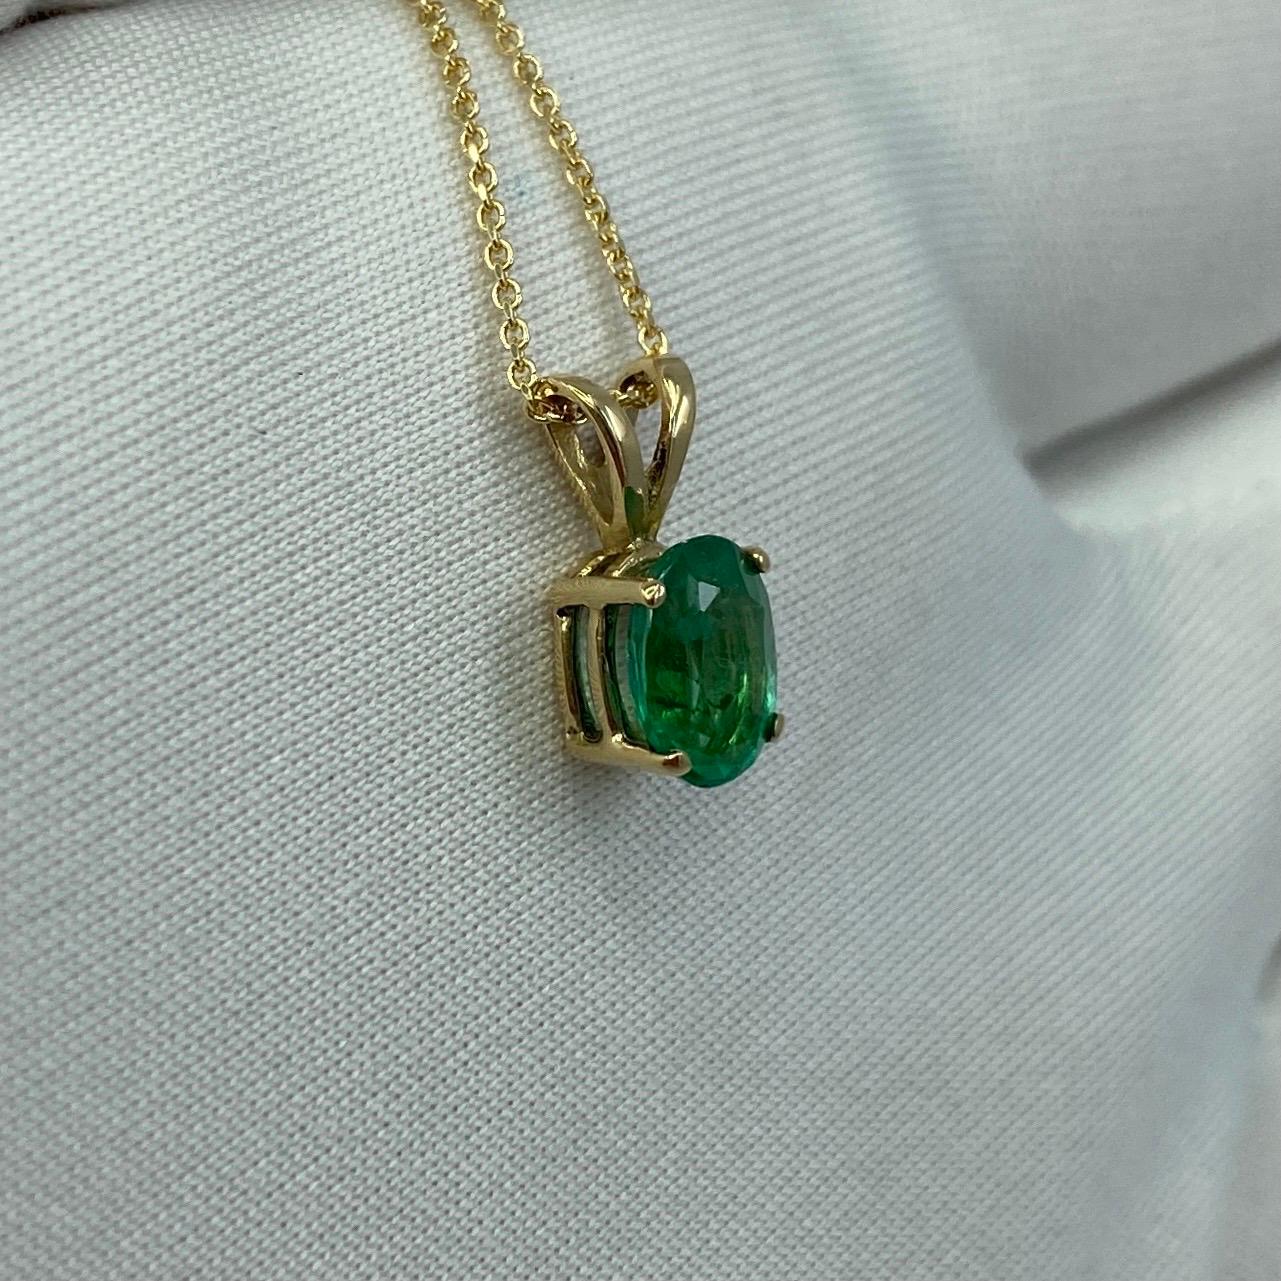 0.85 Carat Vivid Green Emerald Oval Cut Yellow Gold Solitaire Pendant Necklace 5